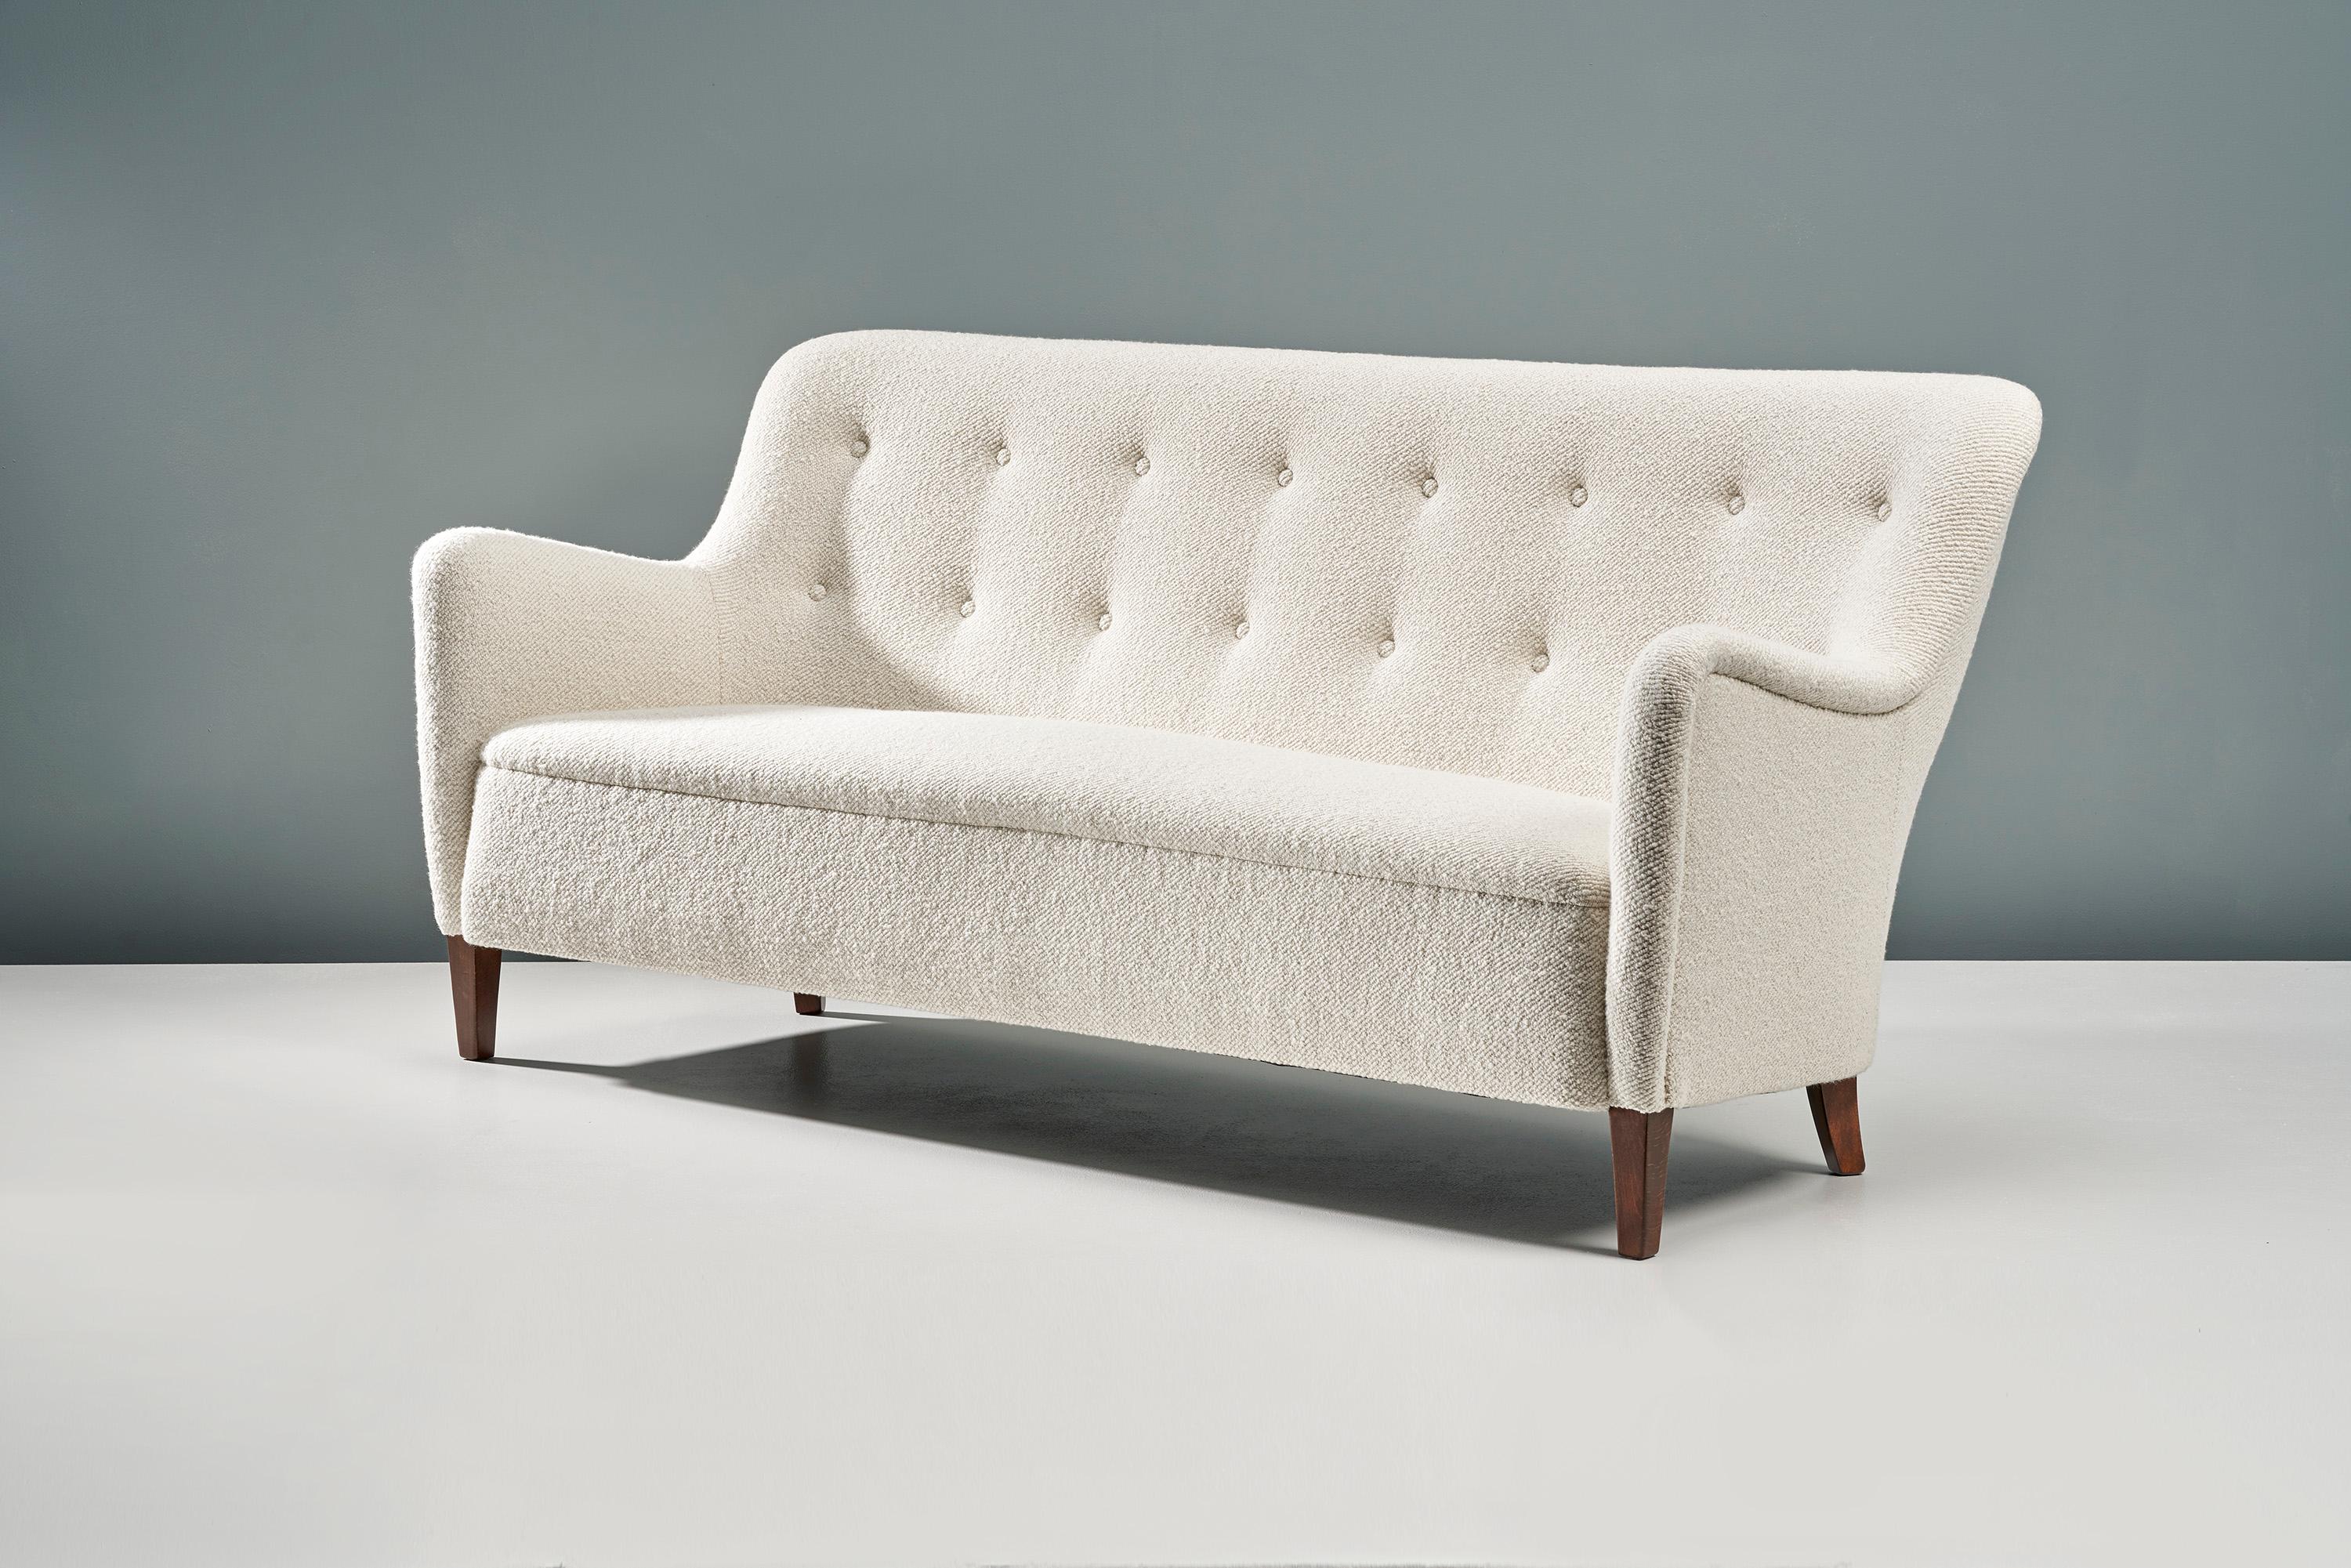 This exceptional piece of Danish furniture was designed in the 1940s by designer Birte Iversen and produced by master cabinetmaker A.J. Iversen. This example has been reupholstered in luxurious cotton-wool blend boucle fabric from Dedar Milan at our